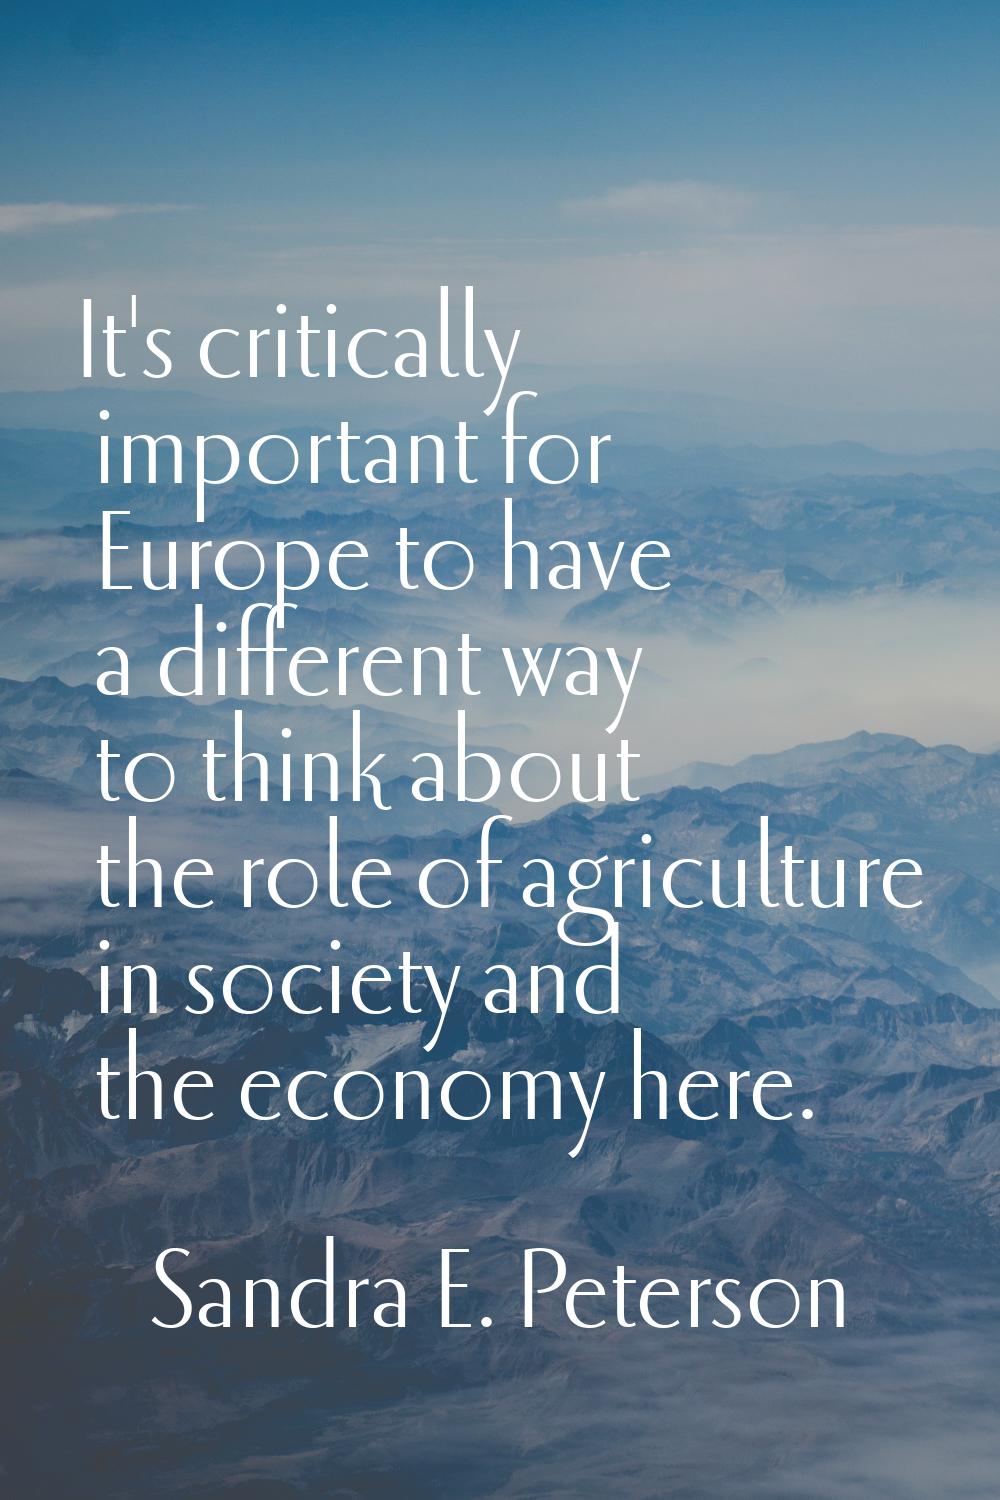 It's critically important for Europe to have a different way to think about the role of agriculture